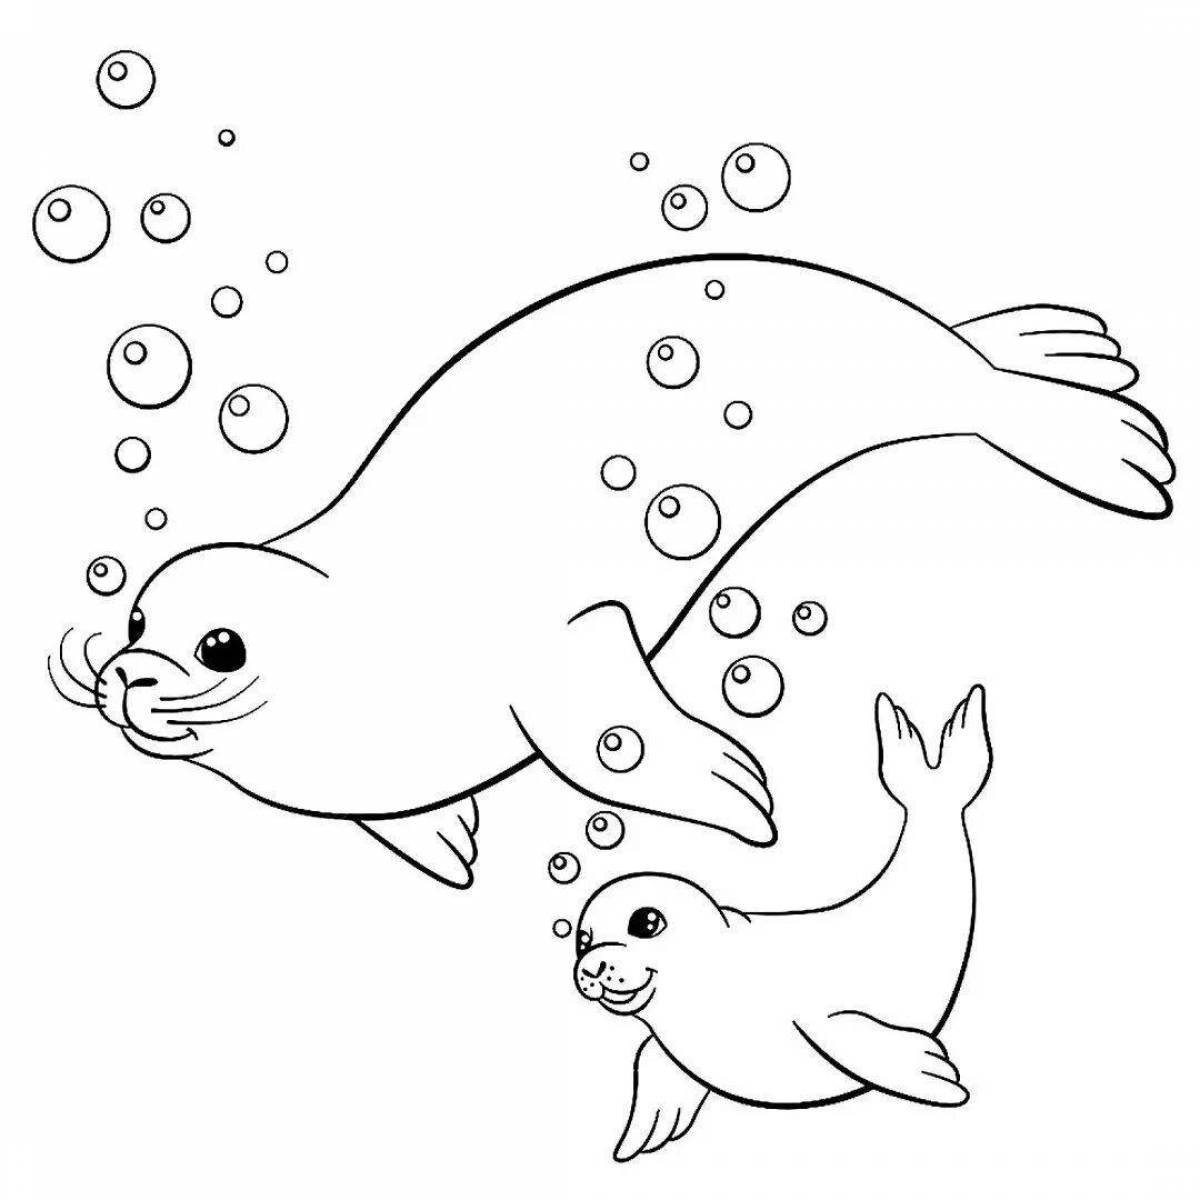 An entertaining coloring book of the Baikal seal for children